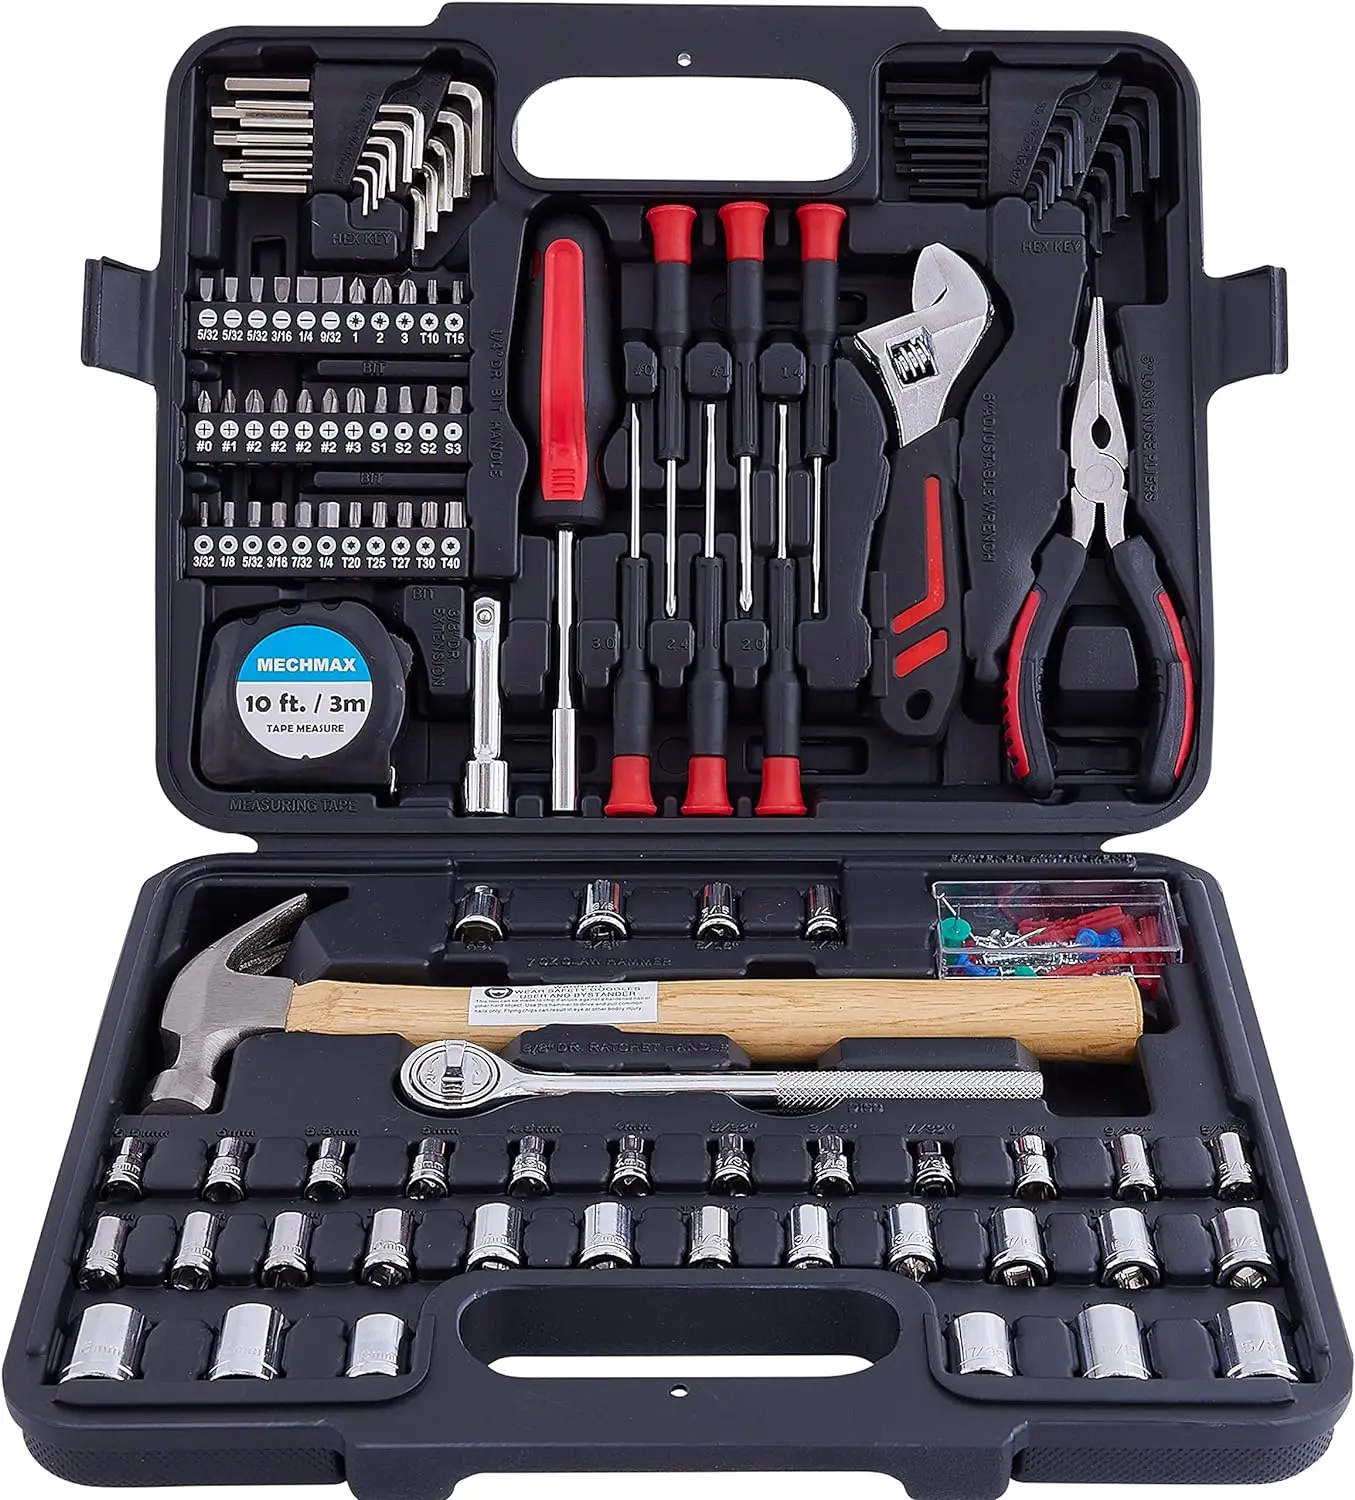 

Home Repair Tool Set 149 Piece with Tool Box Storage Case, for Household, Garage, Car, Apartment, Office, Dorm, New House, Back